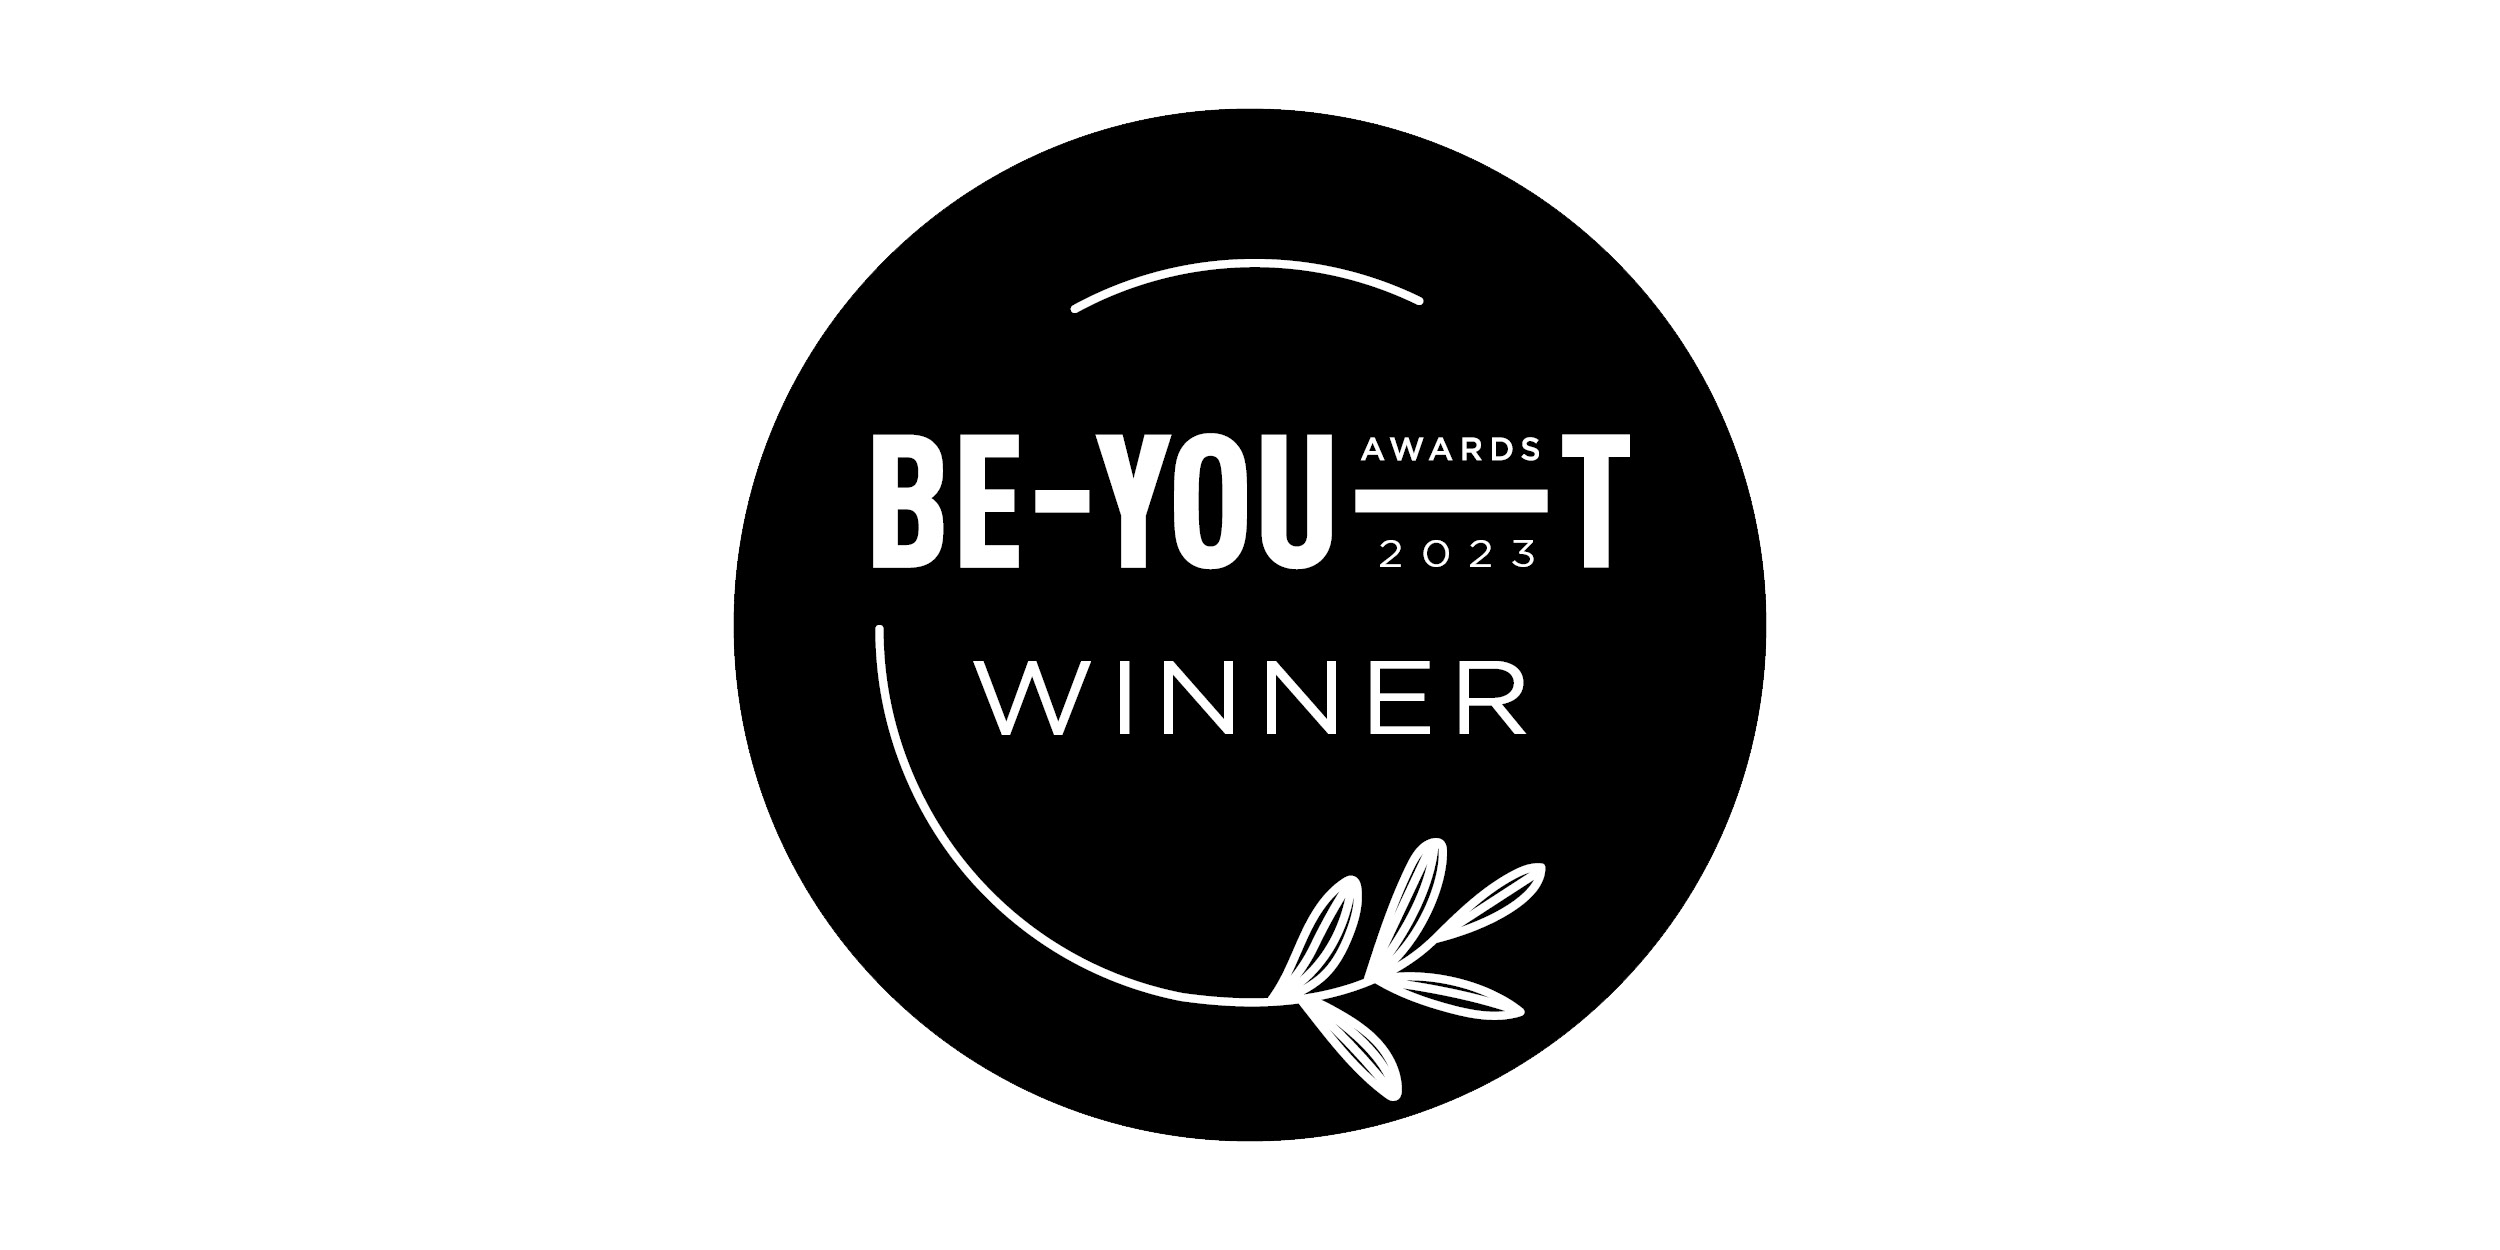 Wellbeing BE-YOUR-T AWARDS 2023 - WINNER